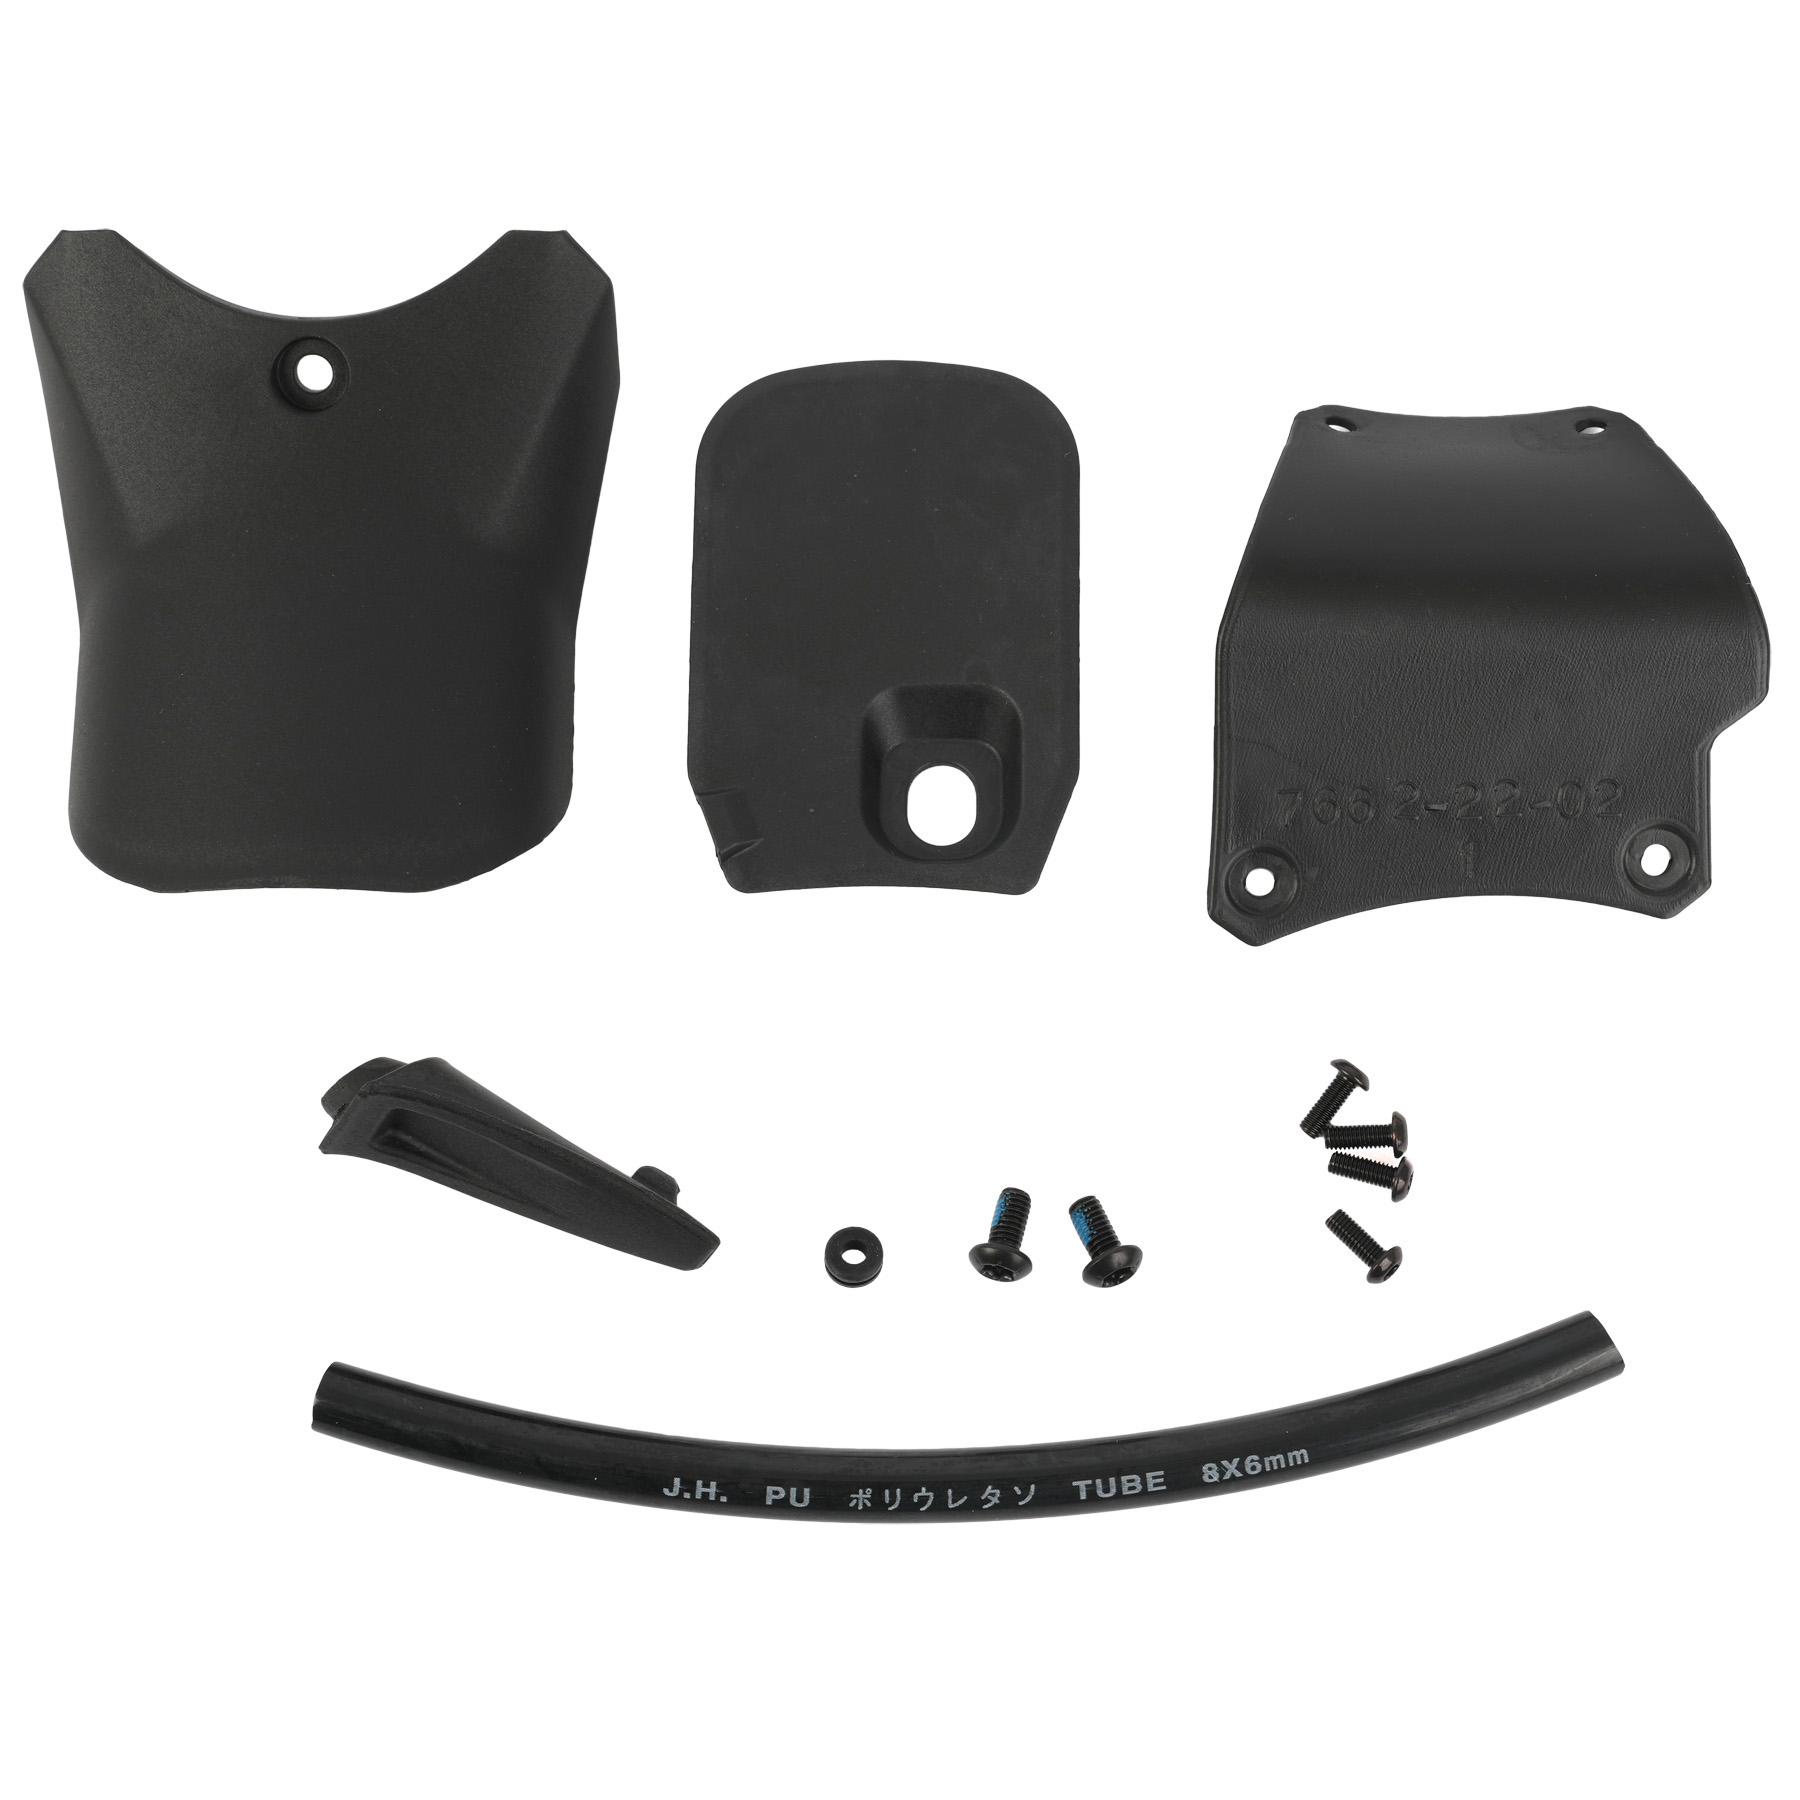 Picture of BMC Small Part Kit for Fourstroke 01 (MY 2019) - 301735